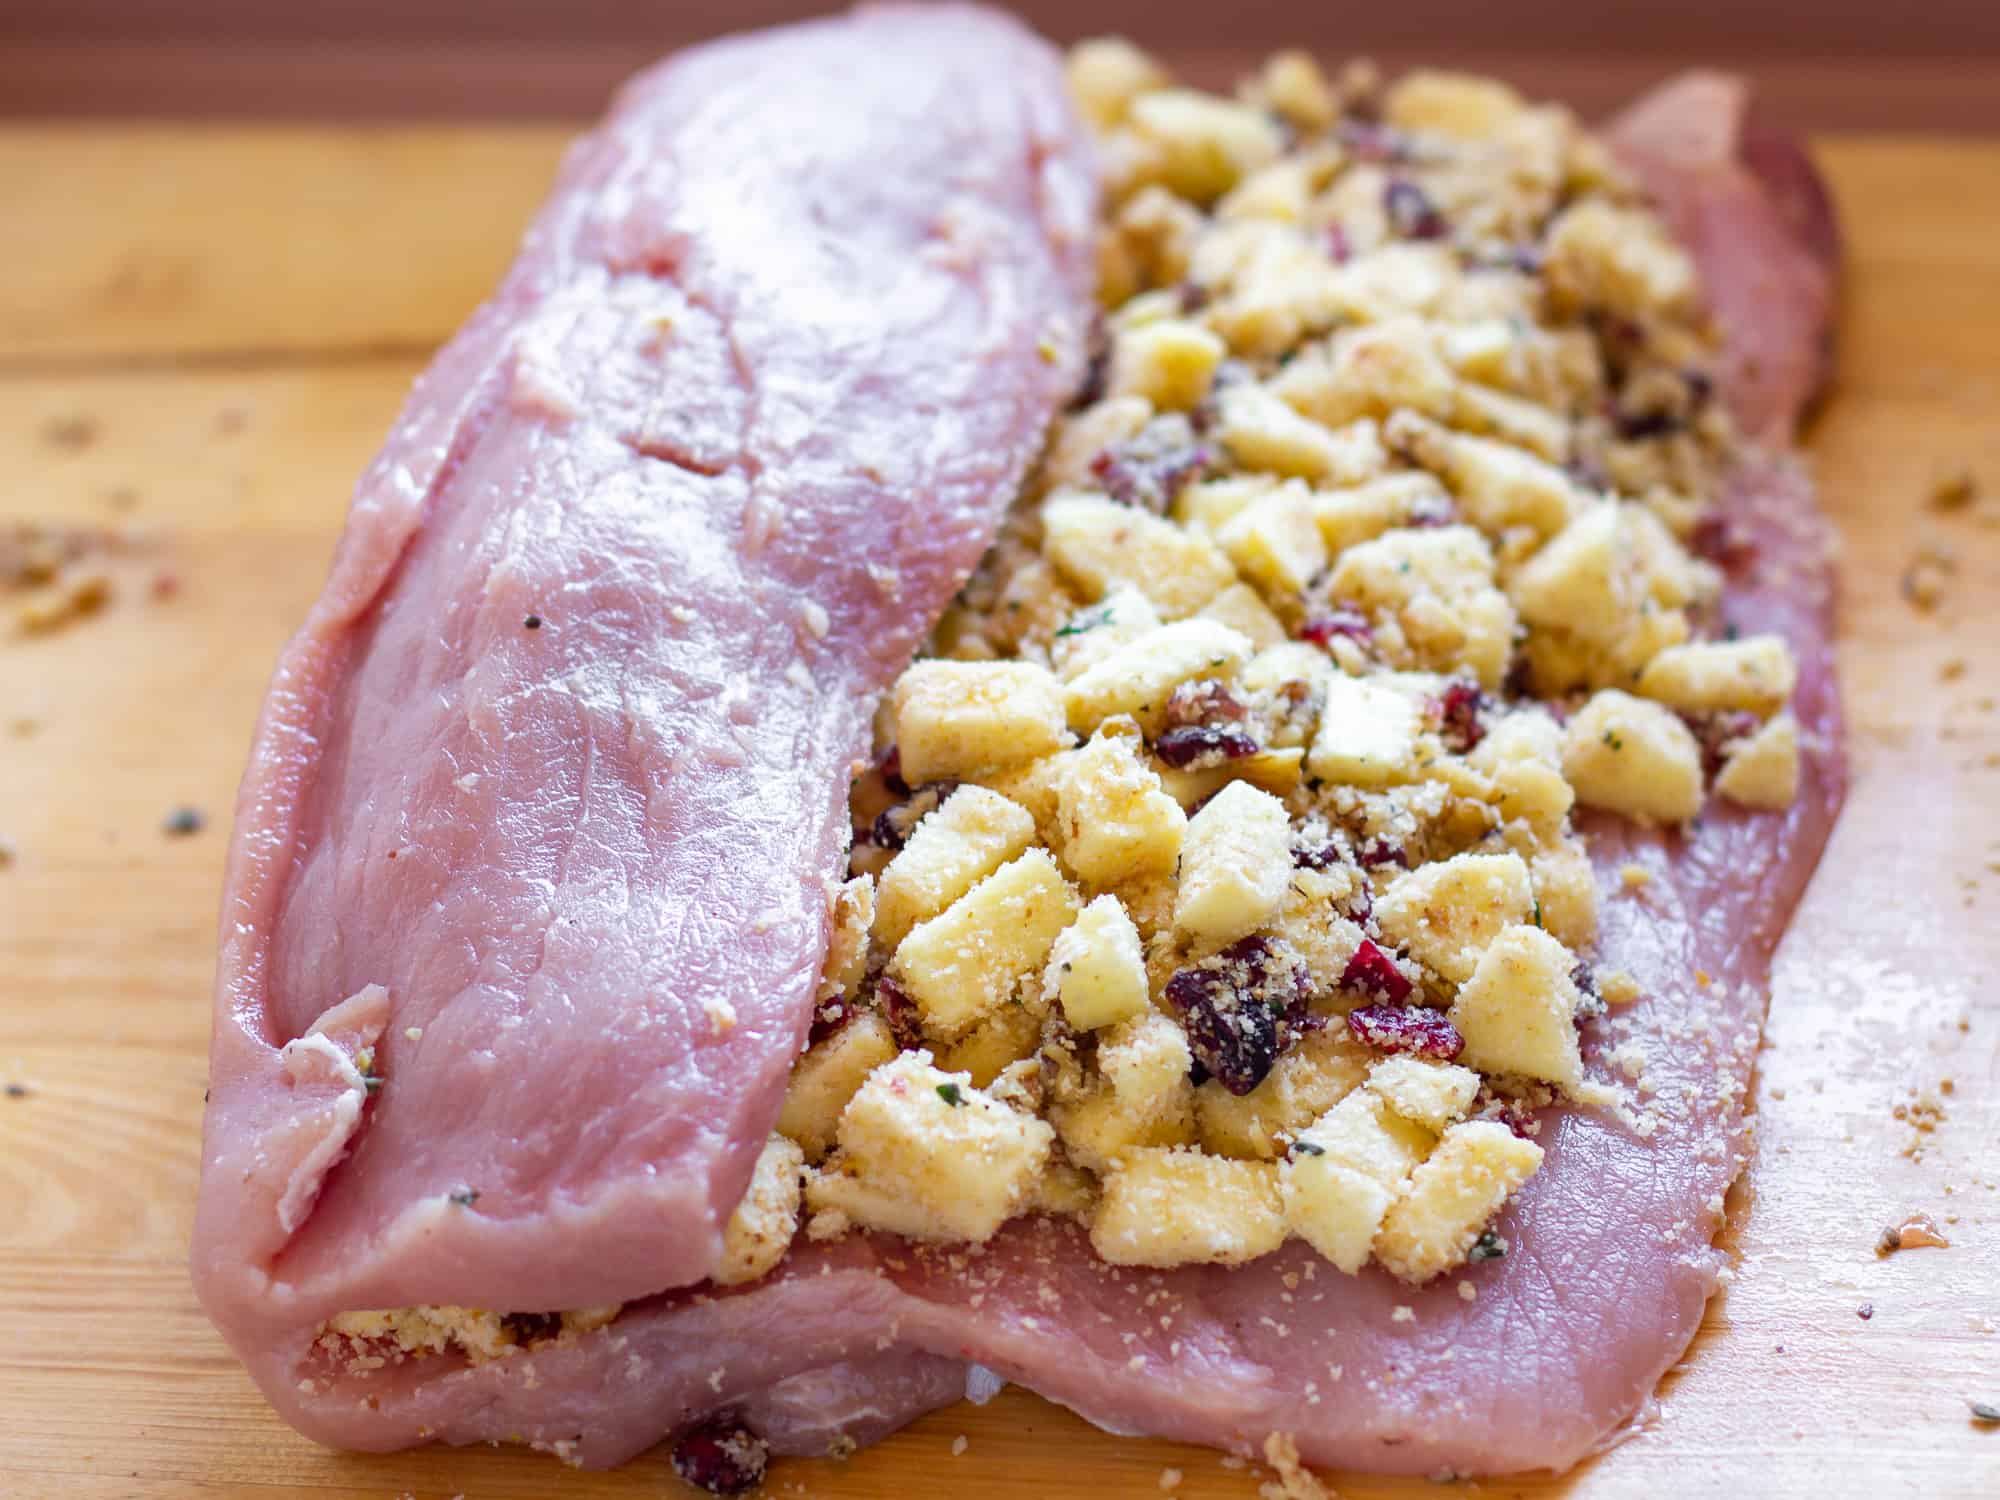 Pork Loin Roast With Apple Cranberry And Walnut Stuffing Recipe,How To Handwash Clothes